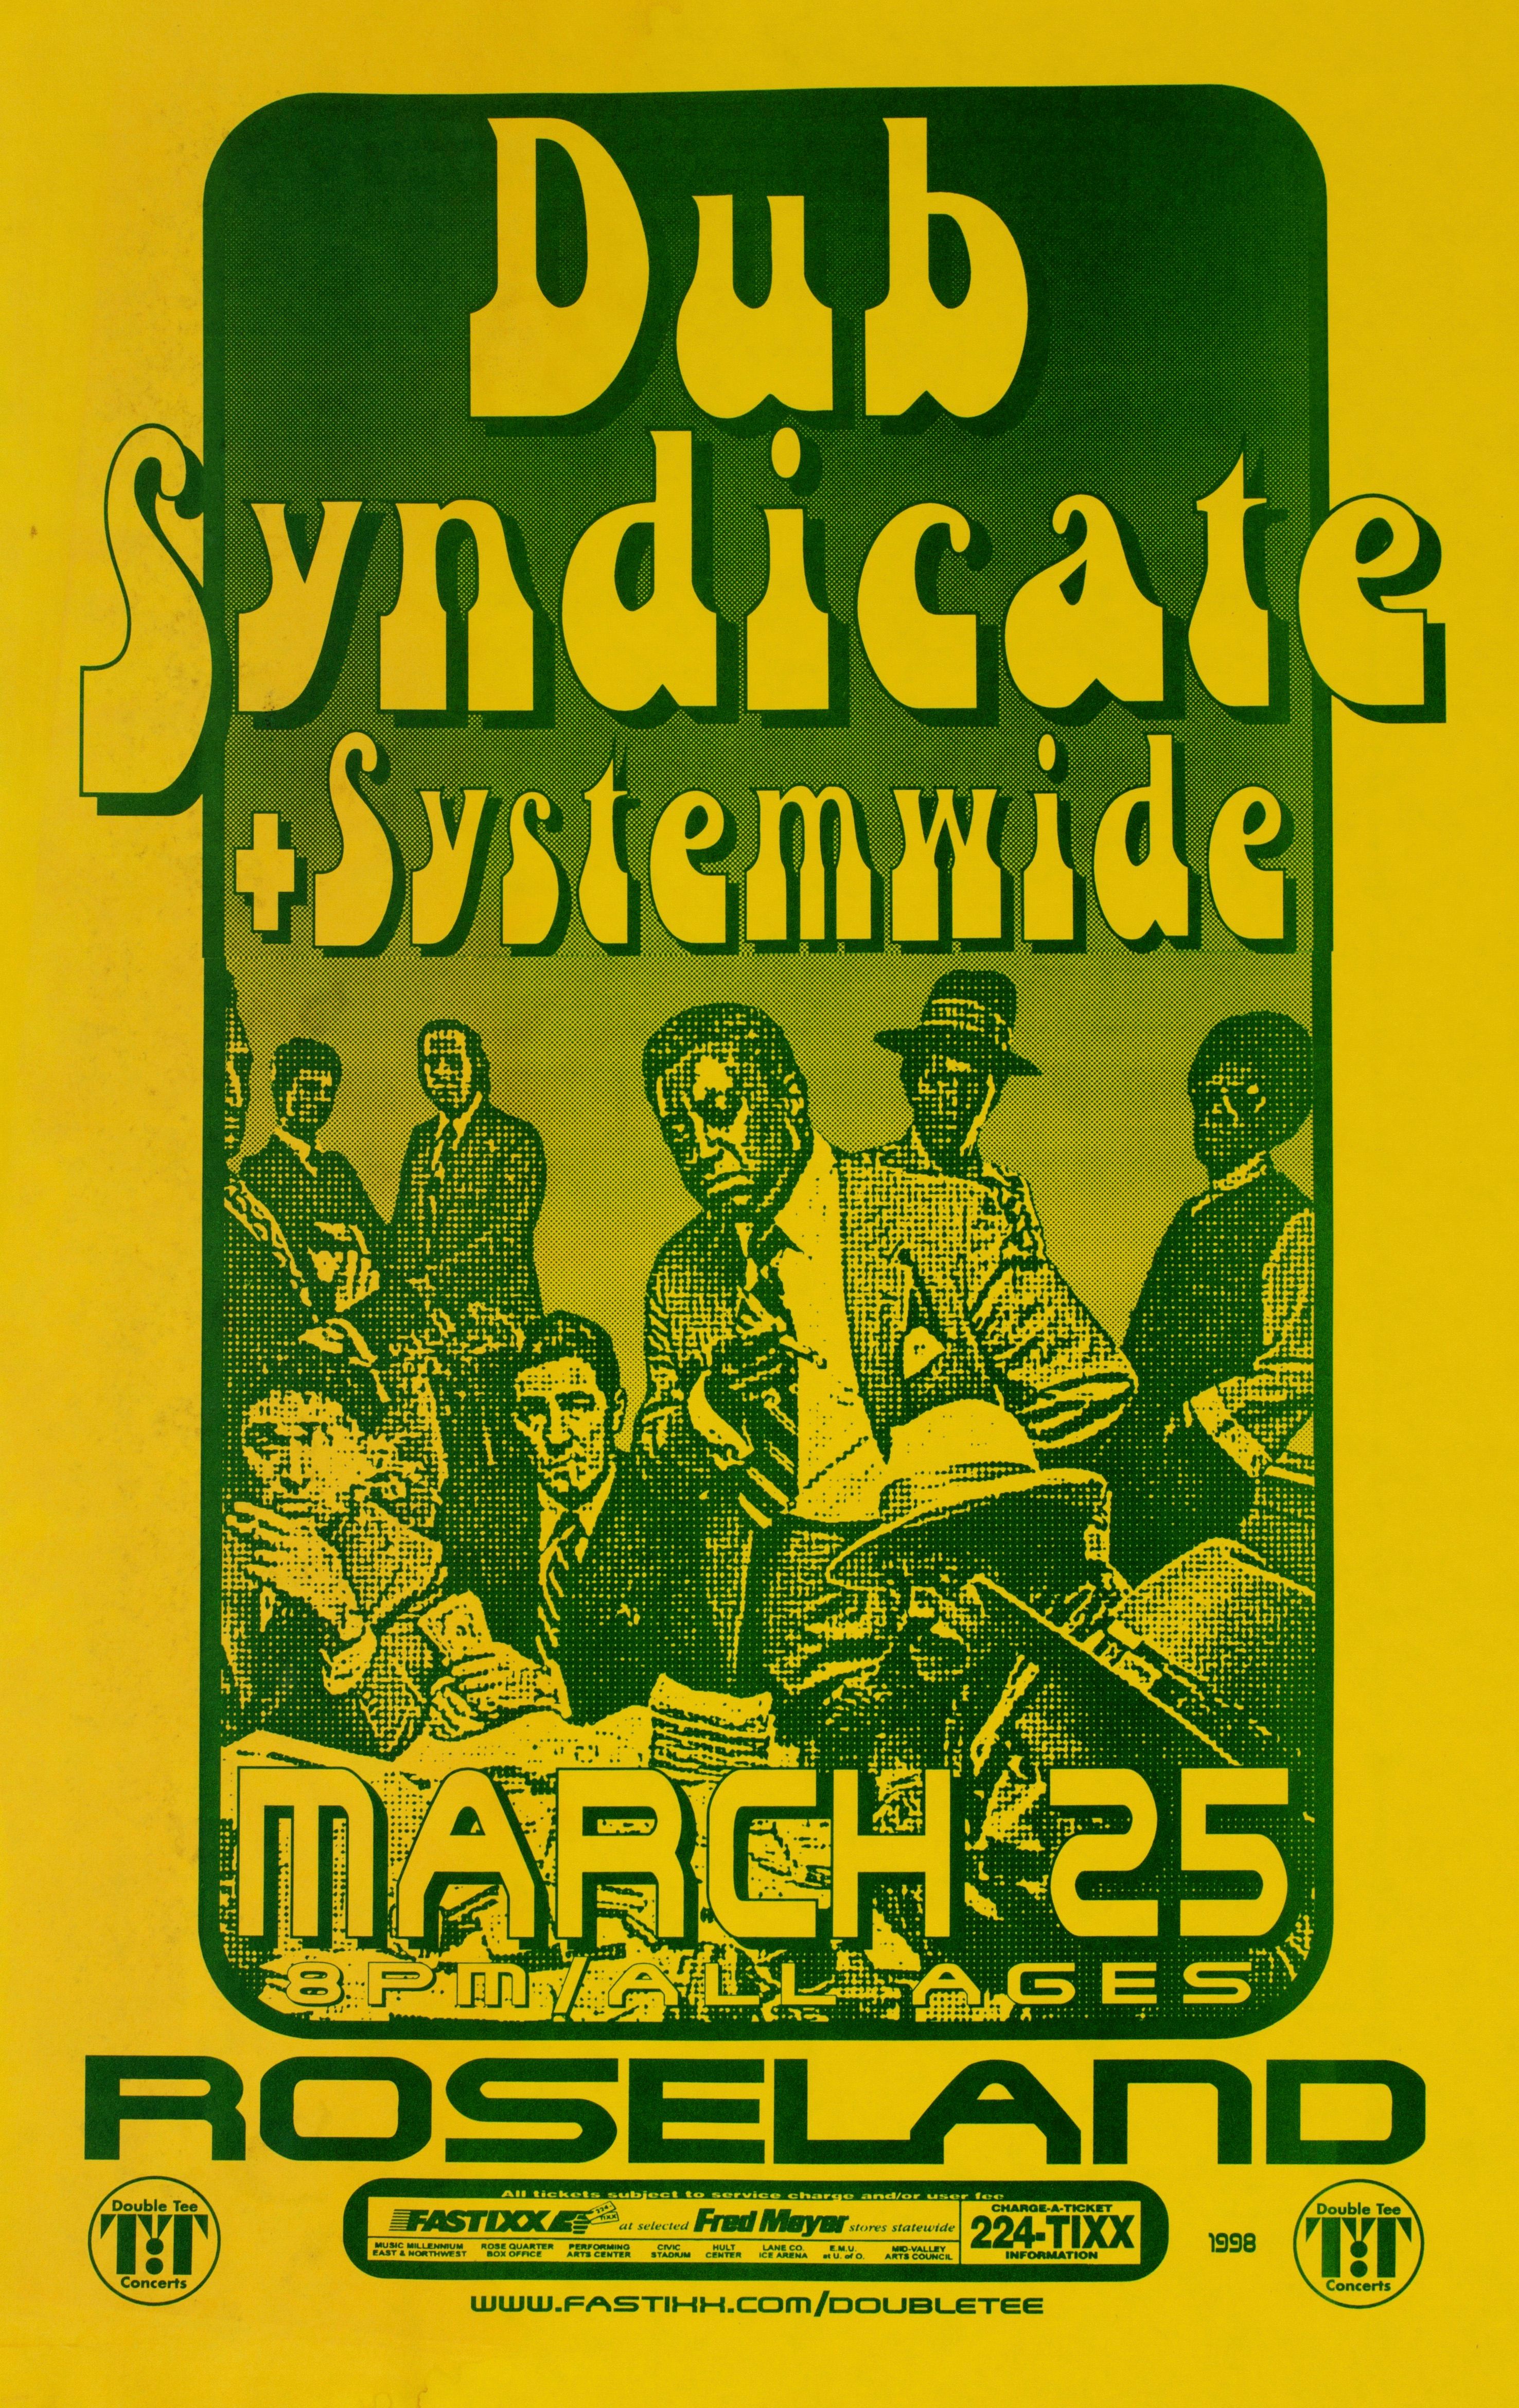 MXP-92.8 Dub Syndicate Roseland Theater 1998 Concert Poster